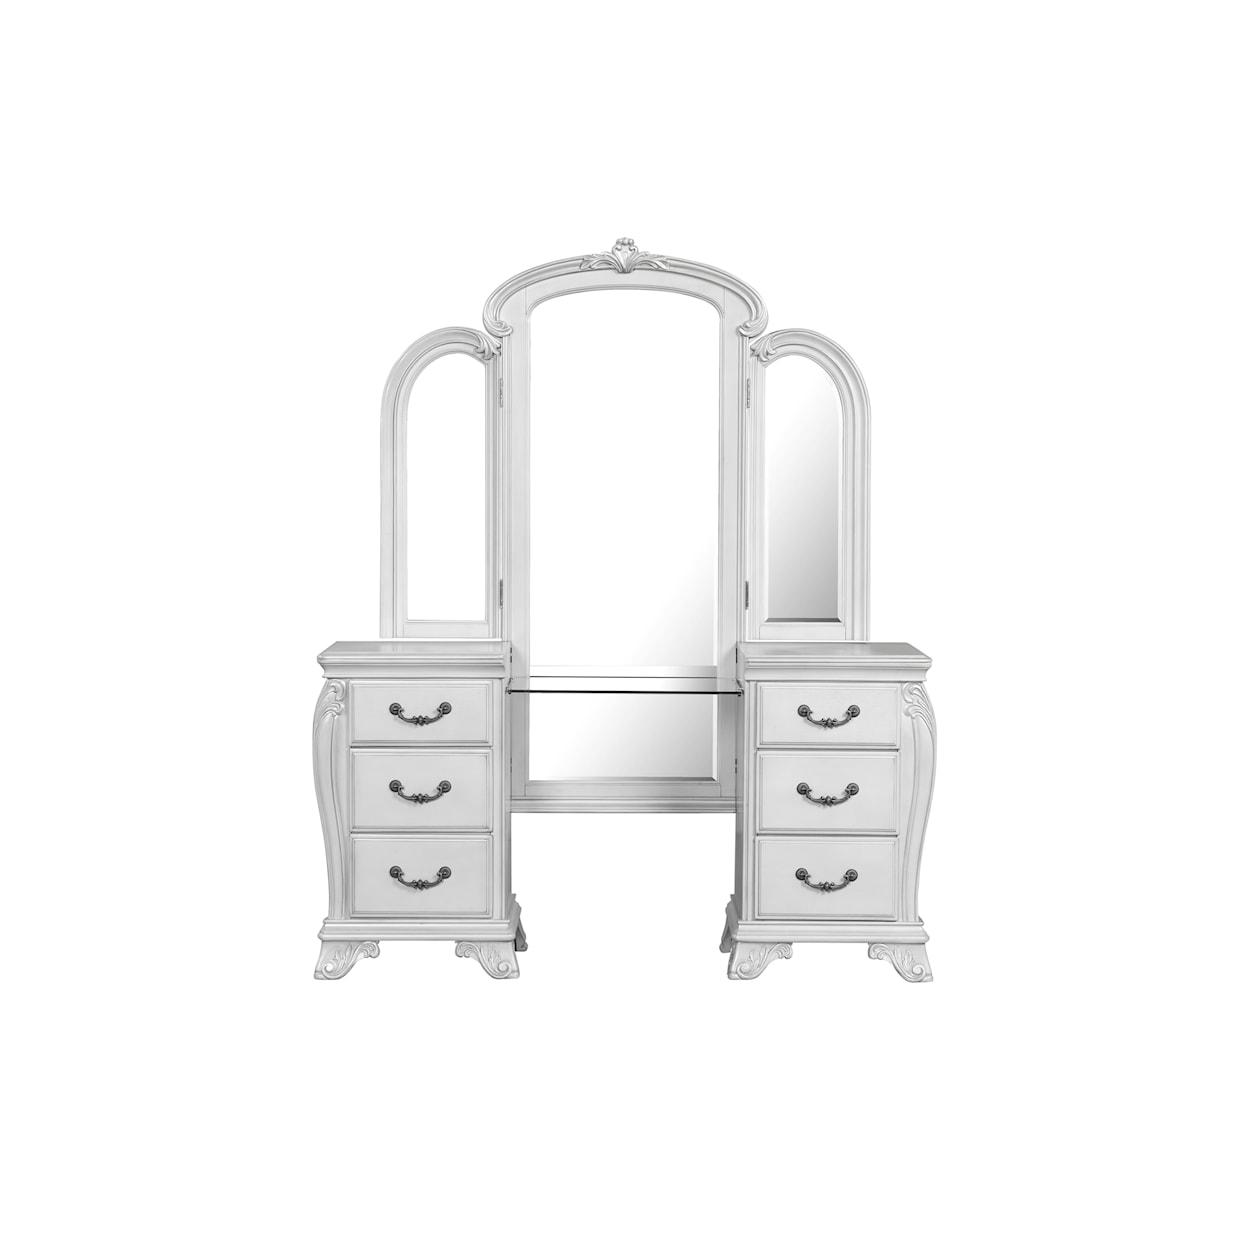 New Classic Furniture Cambria Hills 3-Piece Arched Vanity Mirror